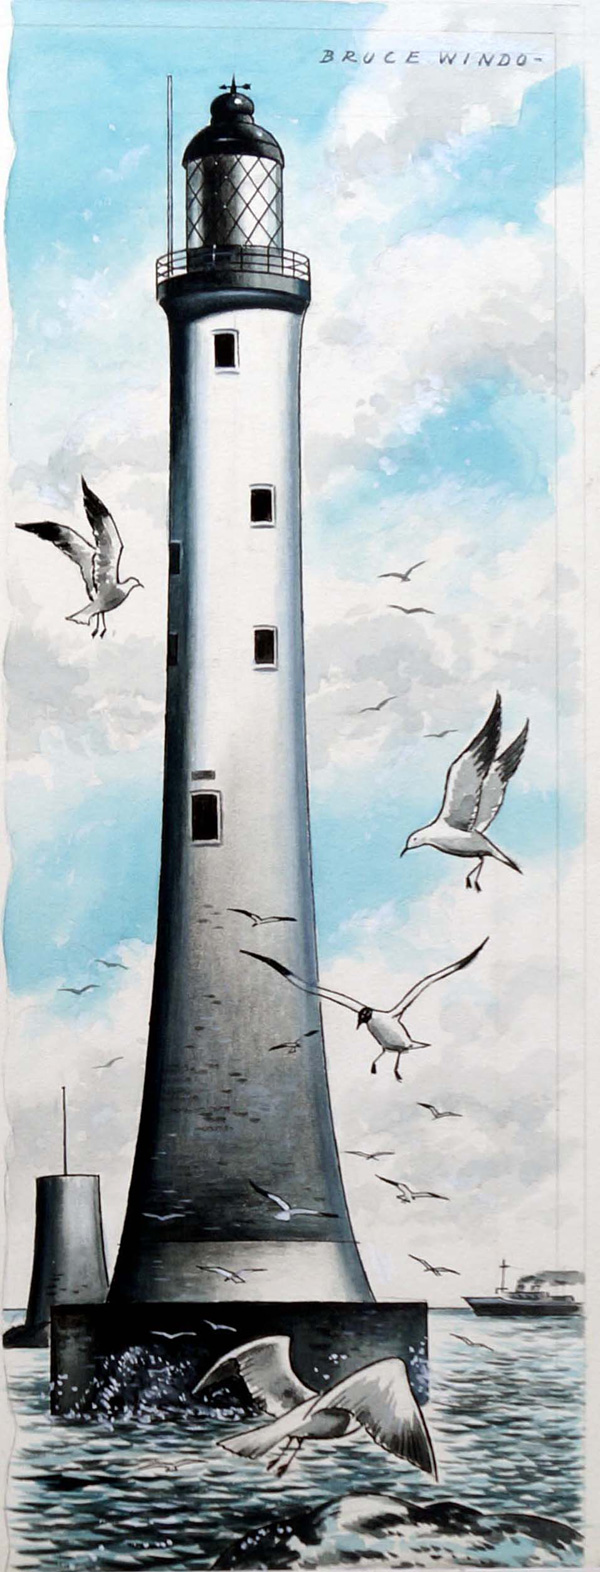 The Fourth Eddystone Lighthouse (Original) (Signed) by Bruce Windo Art at The Illustration Art Gallery